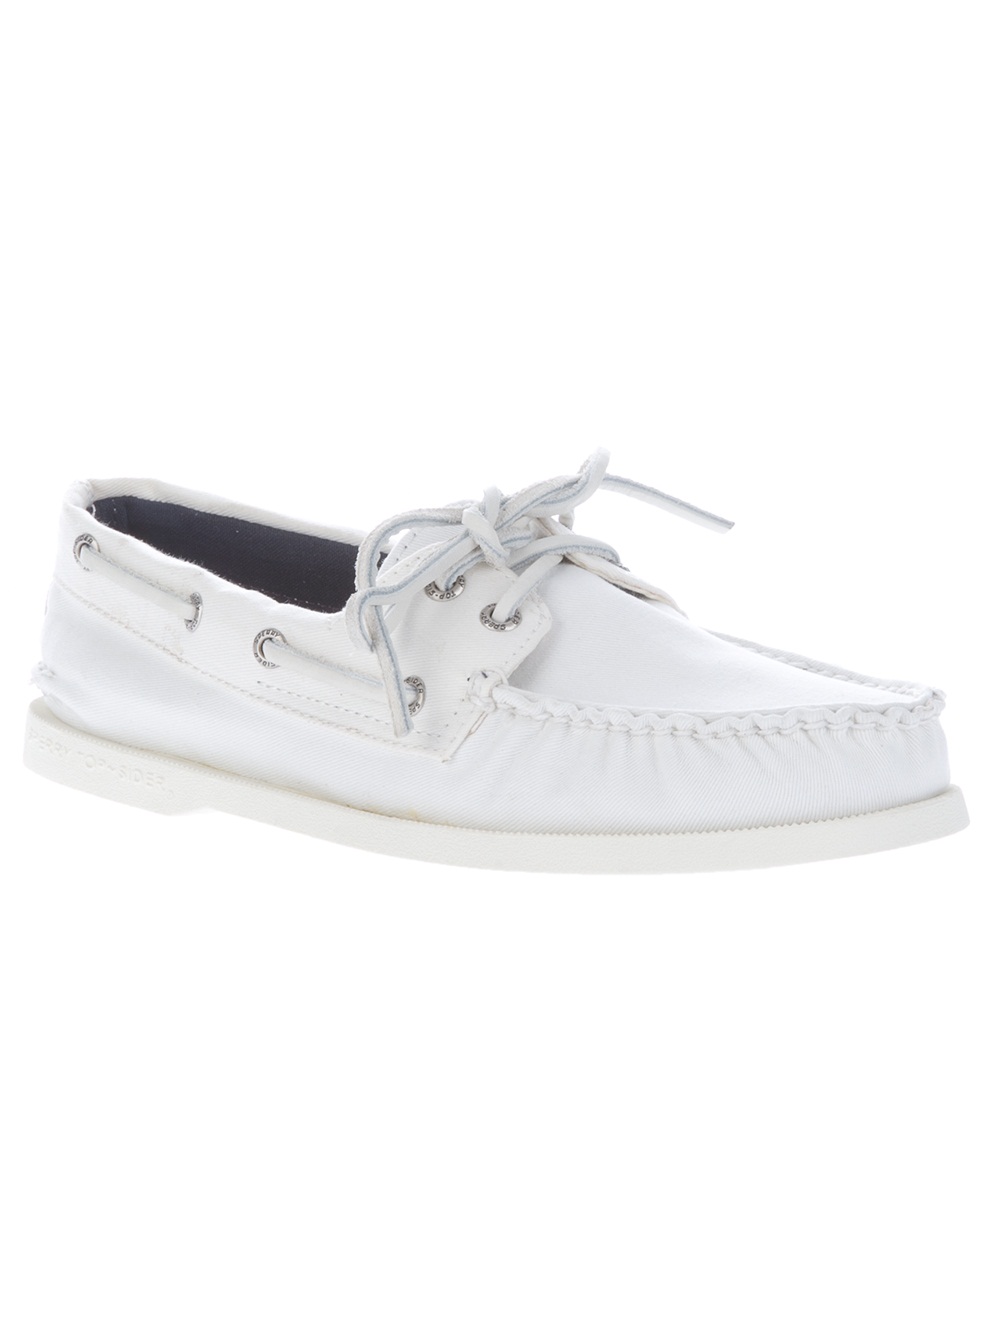 Sperry Top-Sider Boat Shoe in White for 